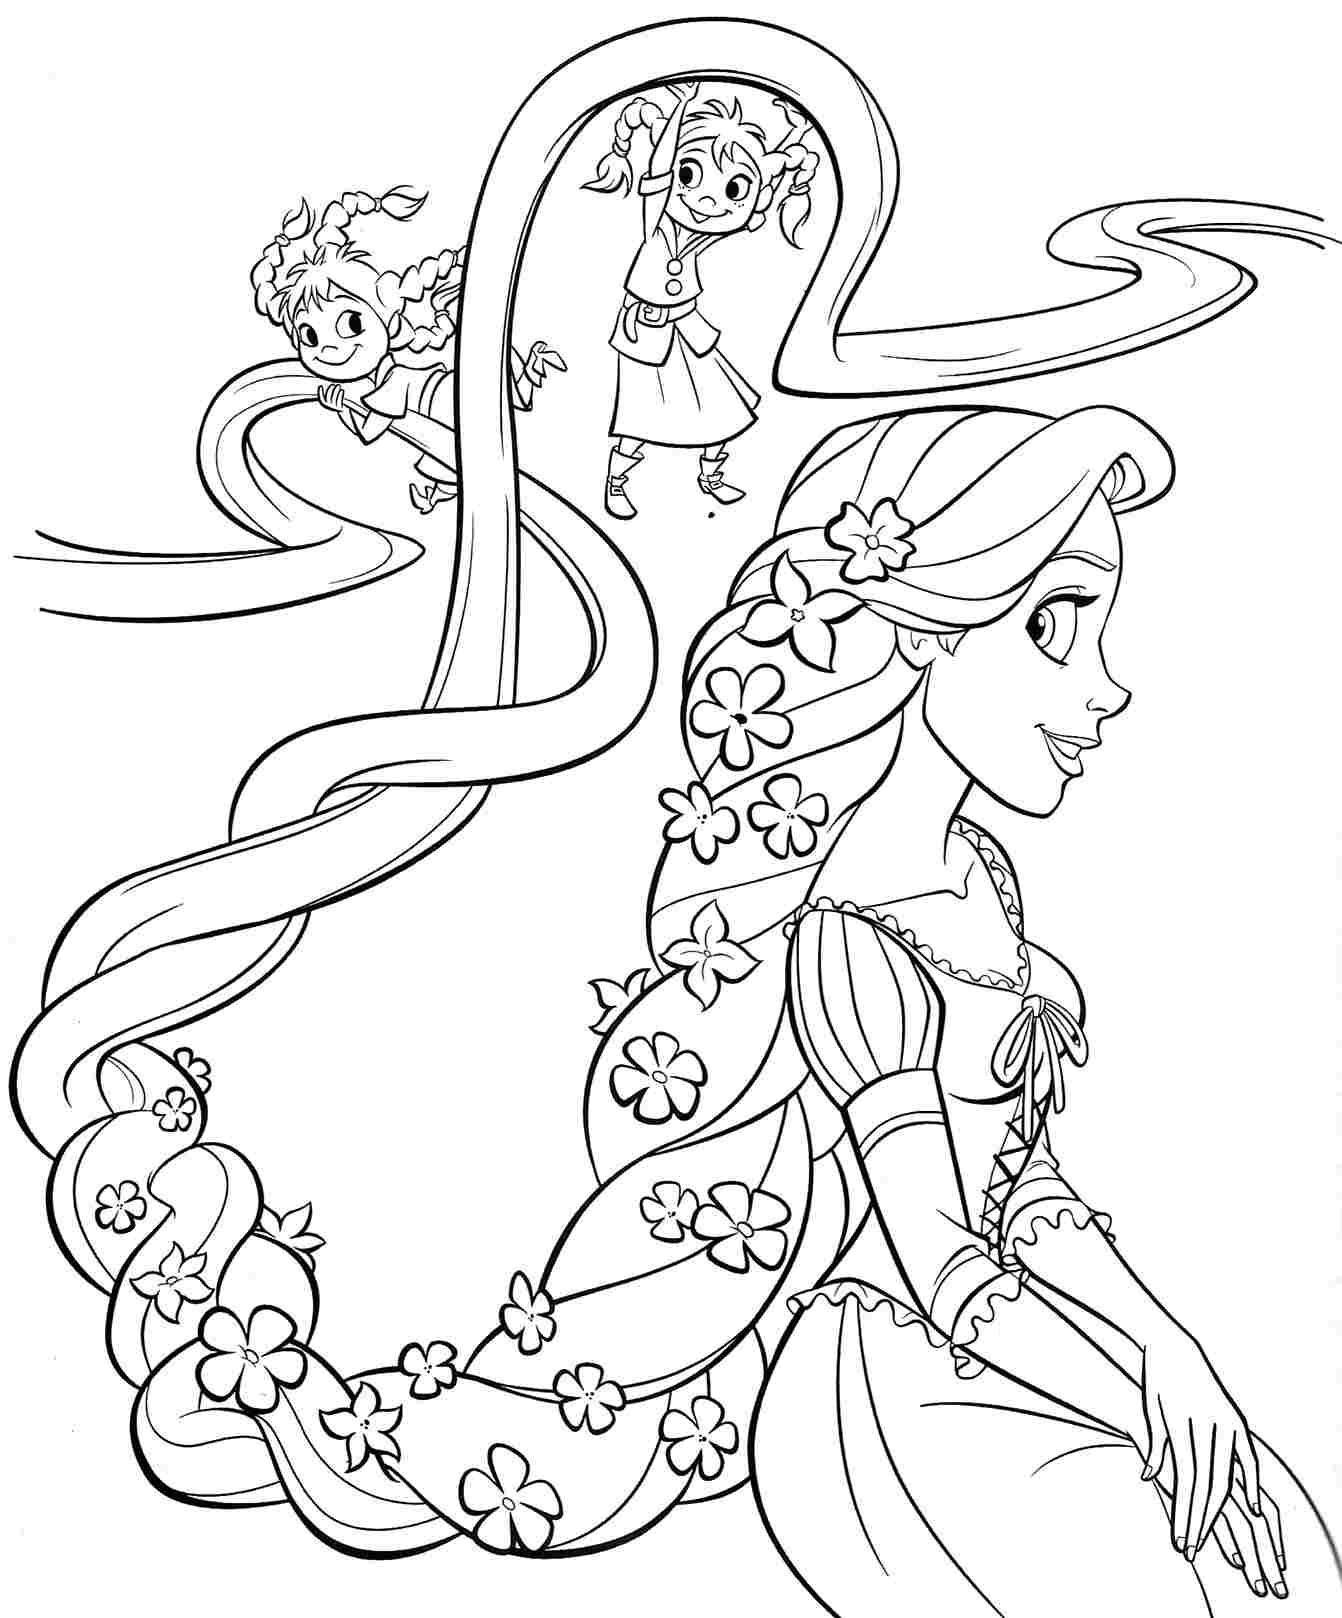 Coloring Long-haired Rapunzel. Category cartoons. Tags:  Disney, Rapunzel.